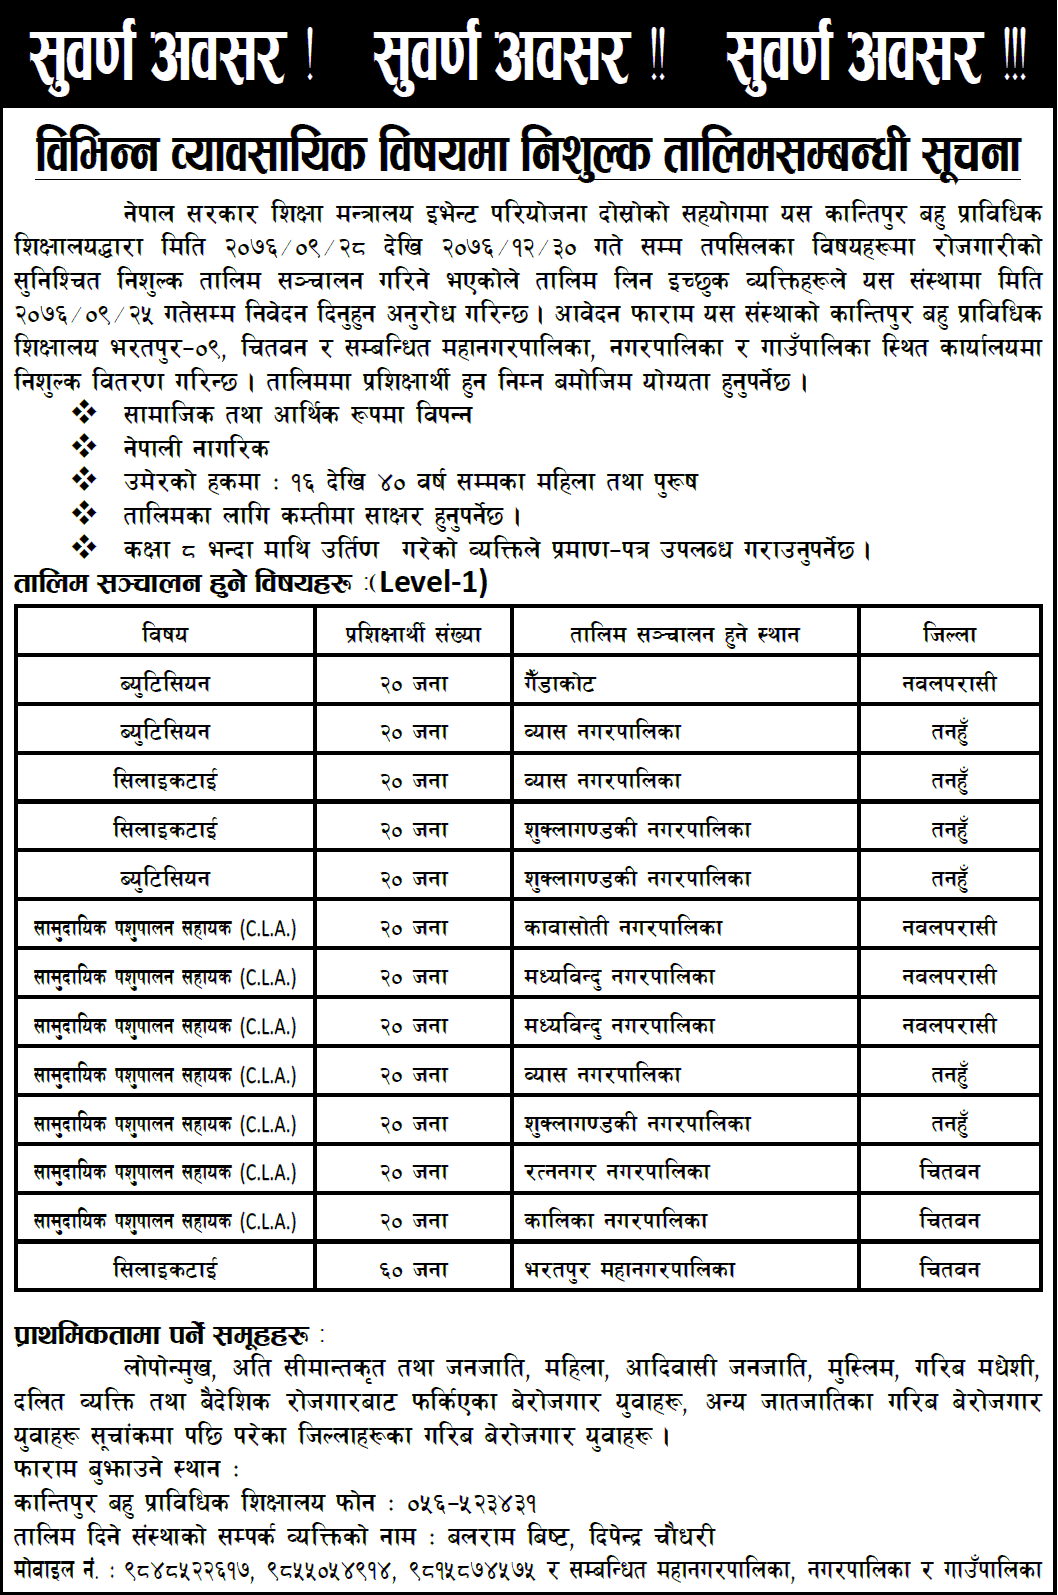 Short-Term Skilled Training in Various Districts